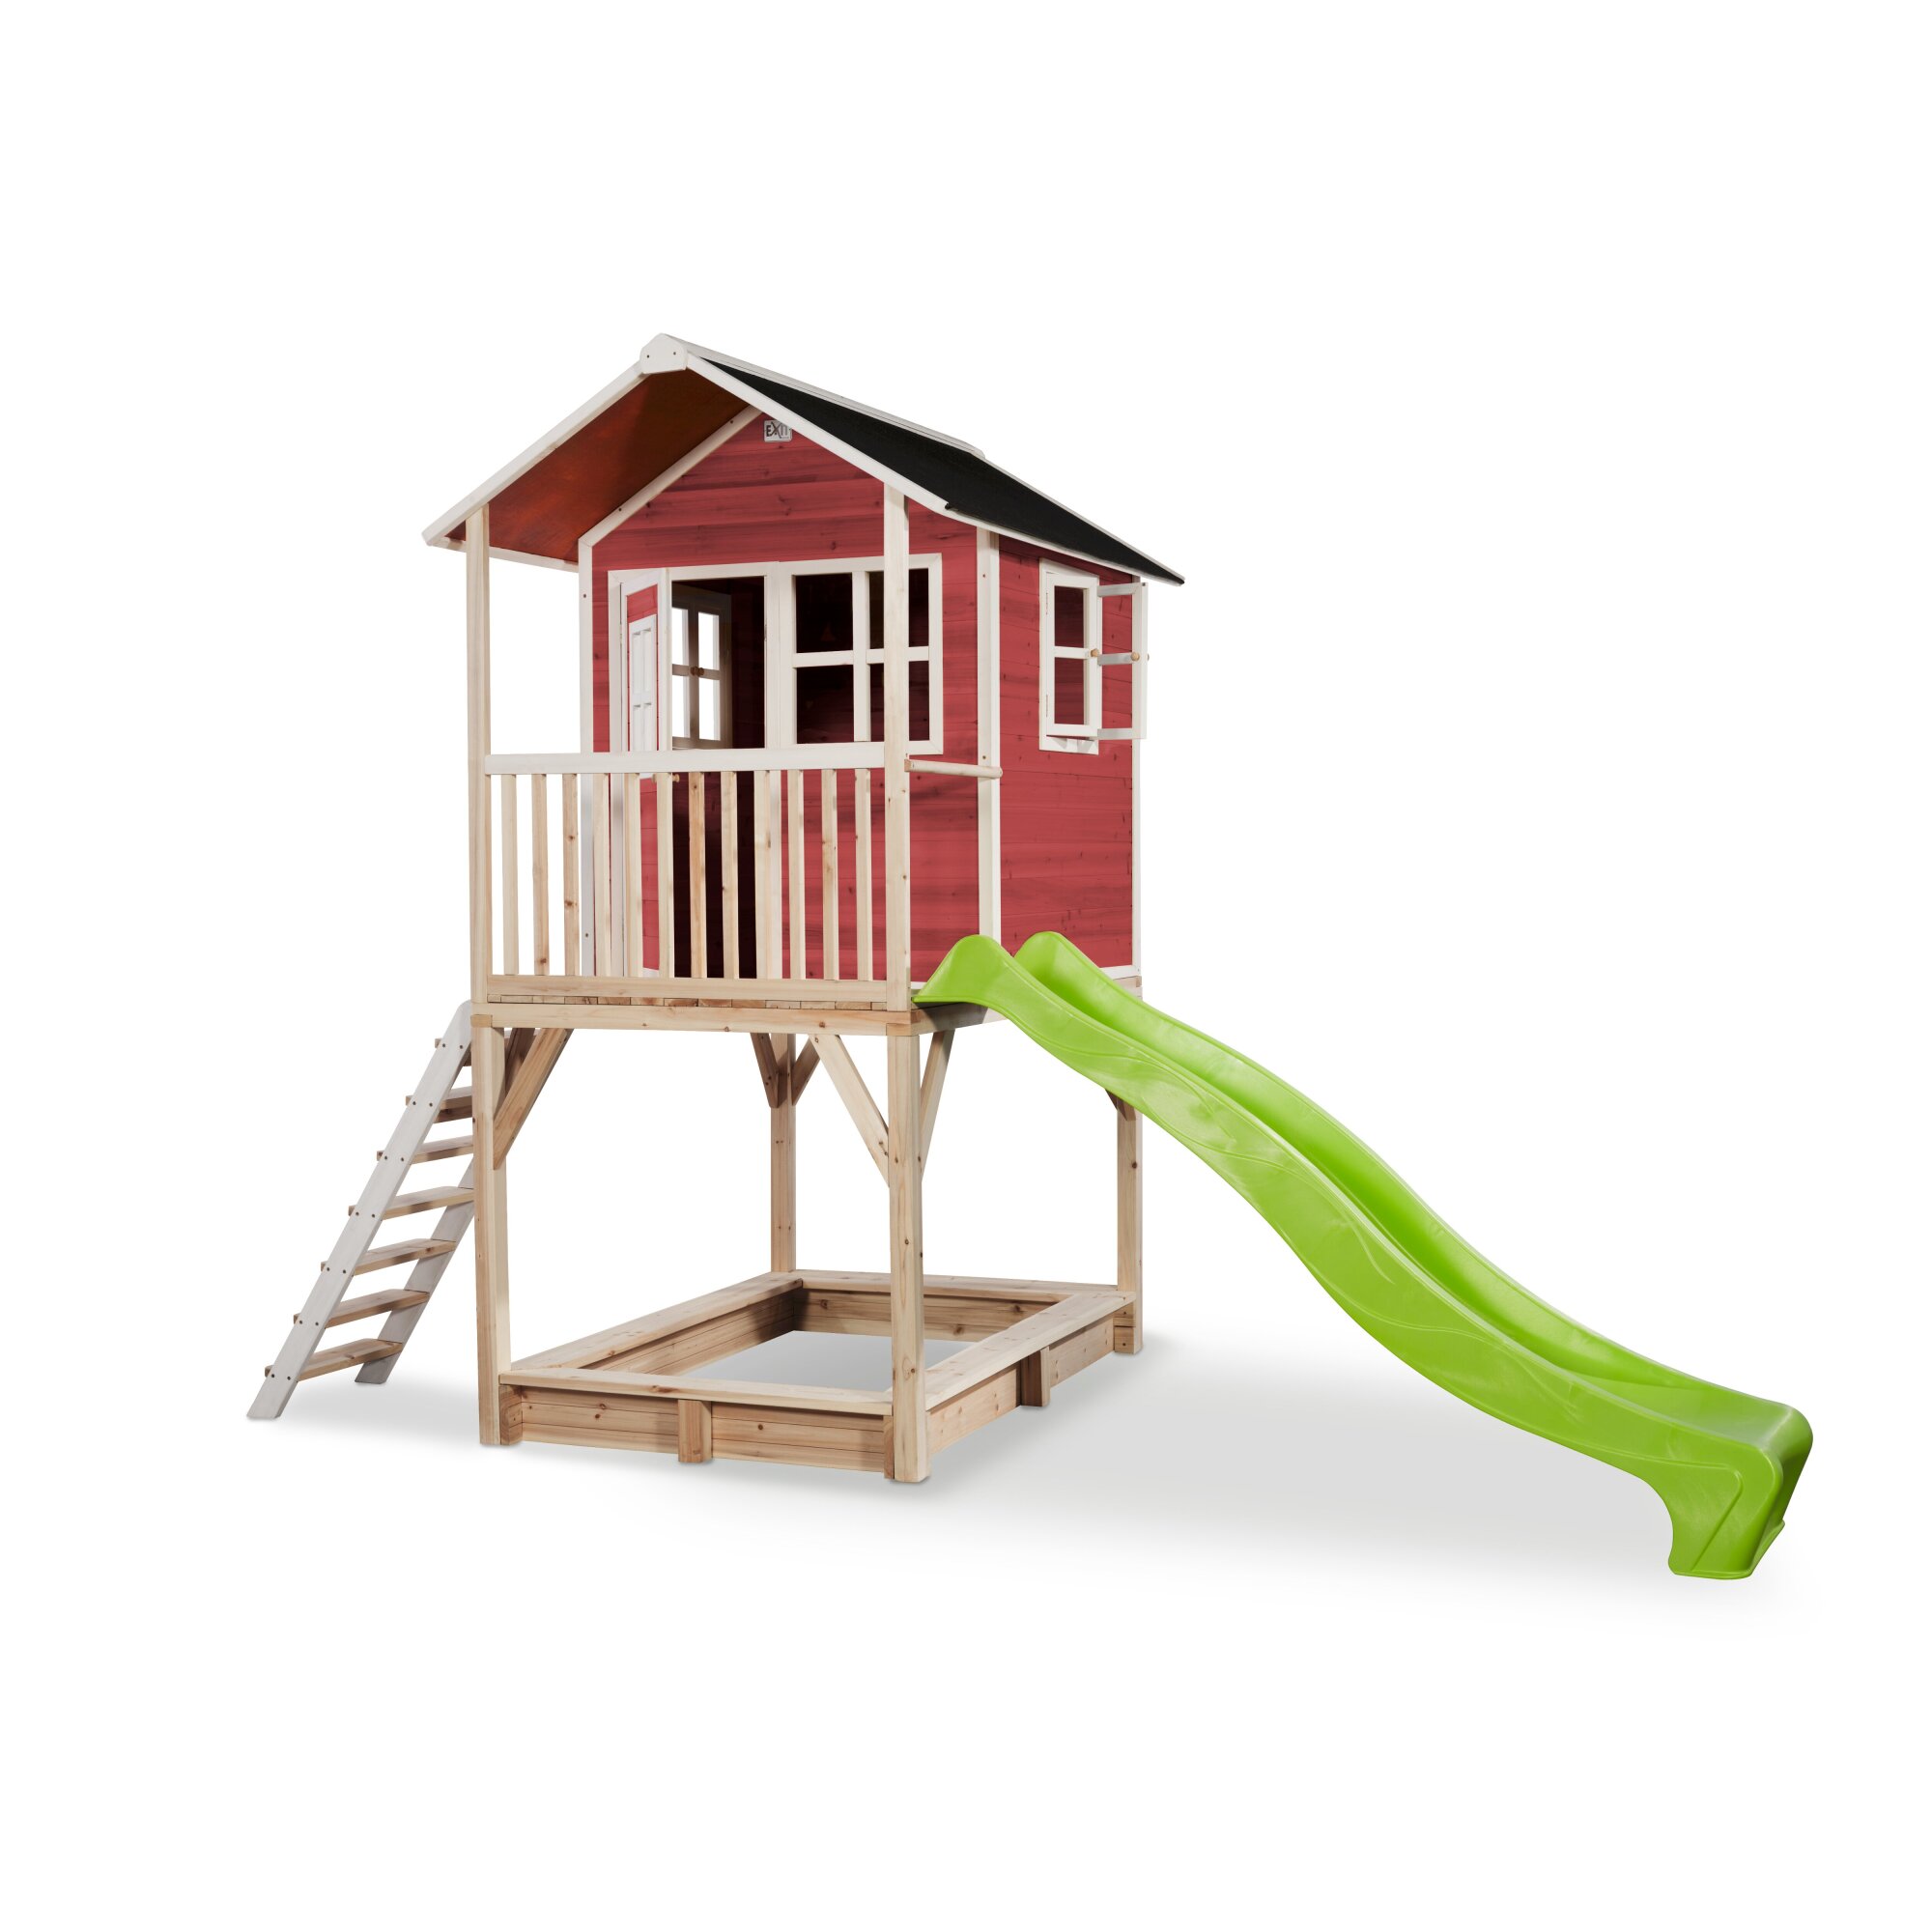 EXIT Loft 700 wooden playhouse - red